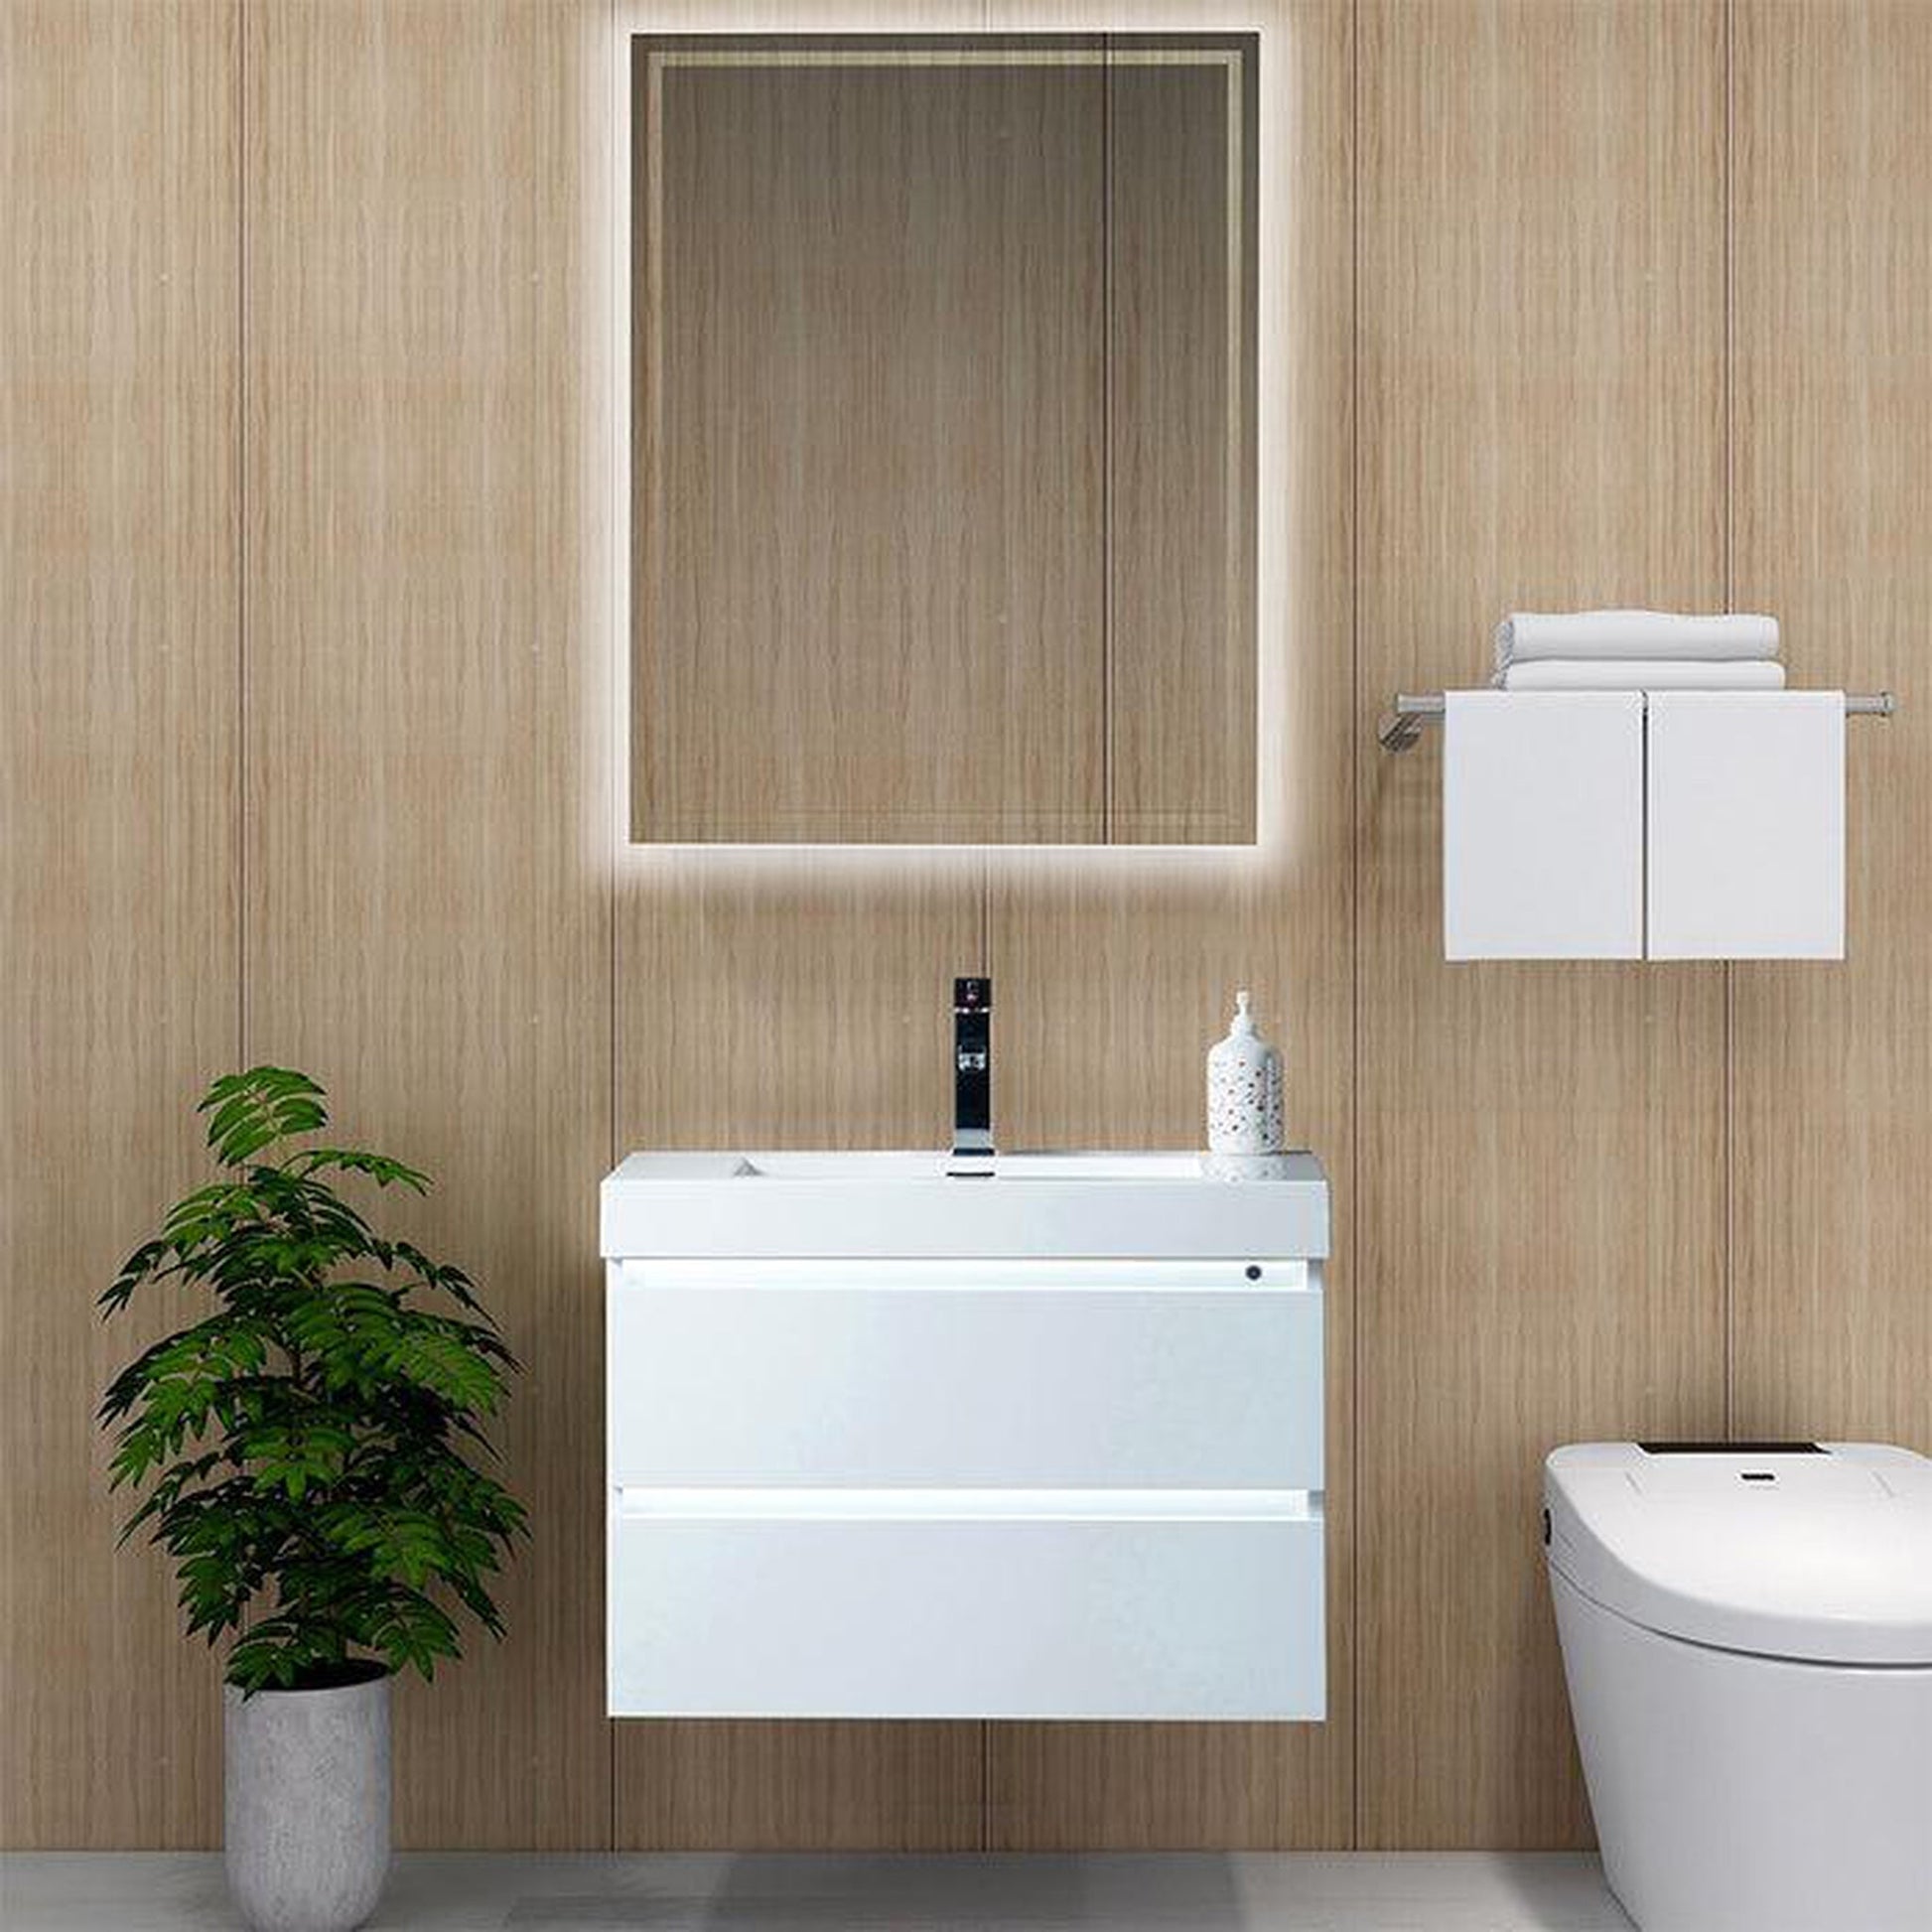 Vanity Art Annecy 30" Glossy White Wall Mounted Vanity Set With White Engineered Stone Top, Integrated Single Sink, Cabinet and Mirror